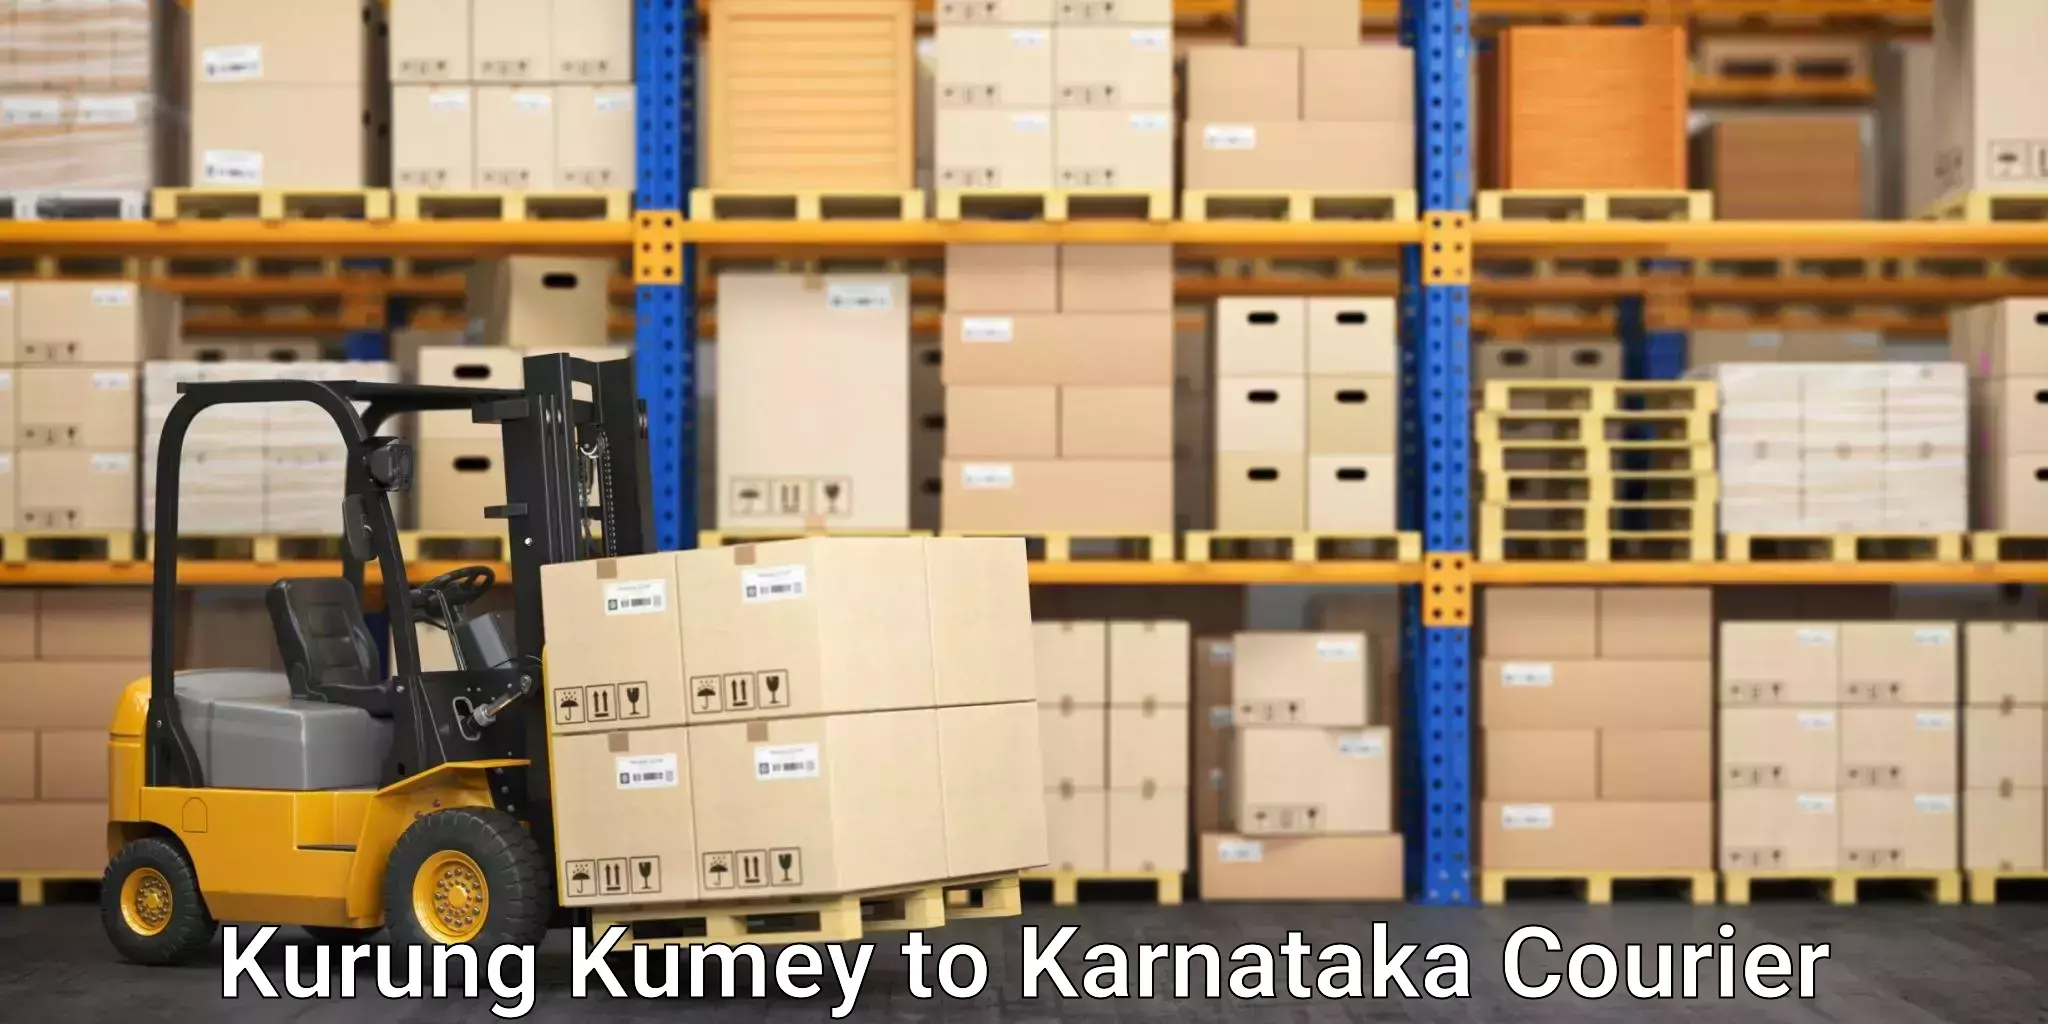 Automated shipping processes Kurung Kumey to KLE Academy of Higher Education and Research Belagavi